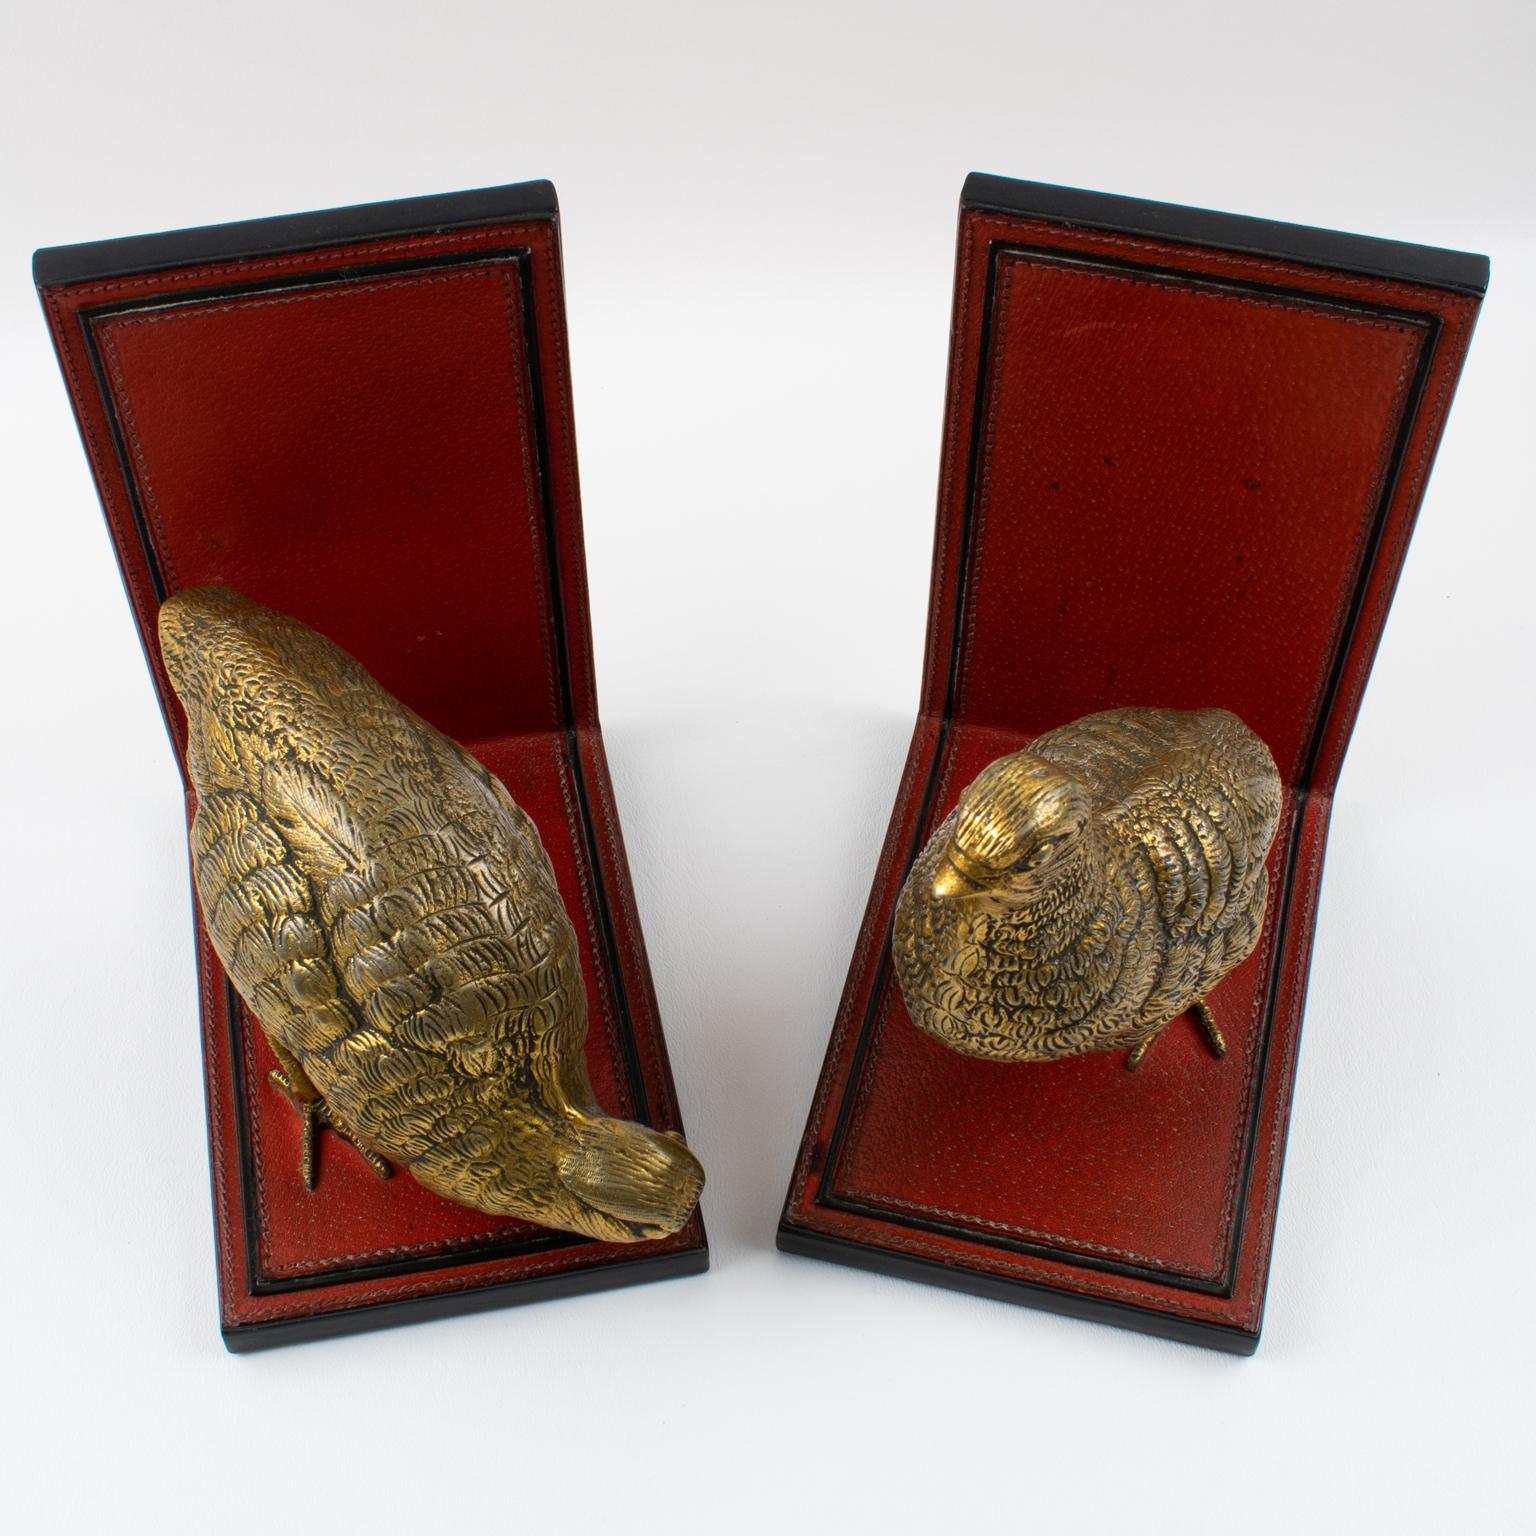 Late 20th Century Gucci Italy Hand-Stitched Red Leather Bookends with Gilt Metal Partridges, 1970s For Sale